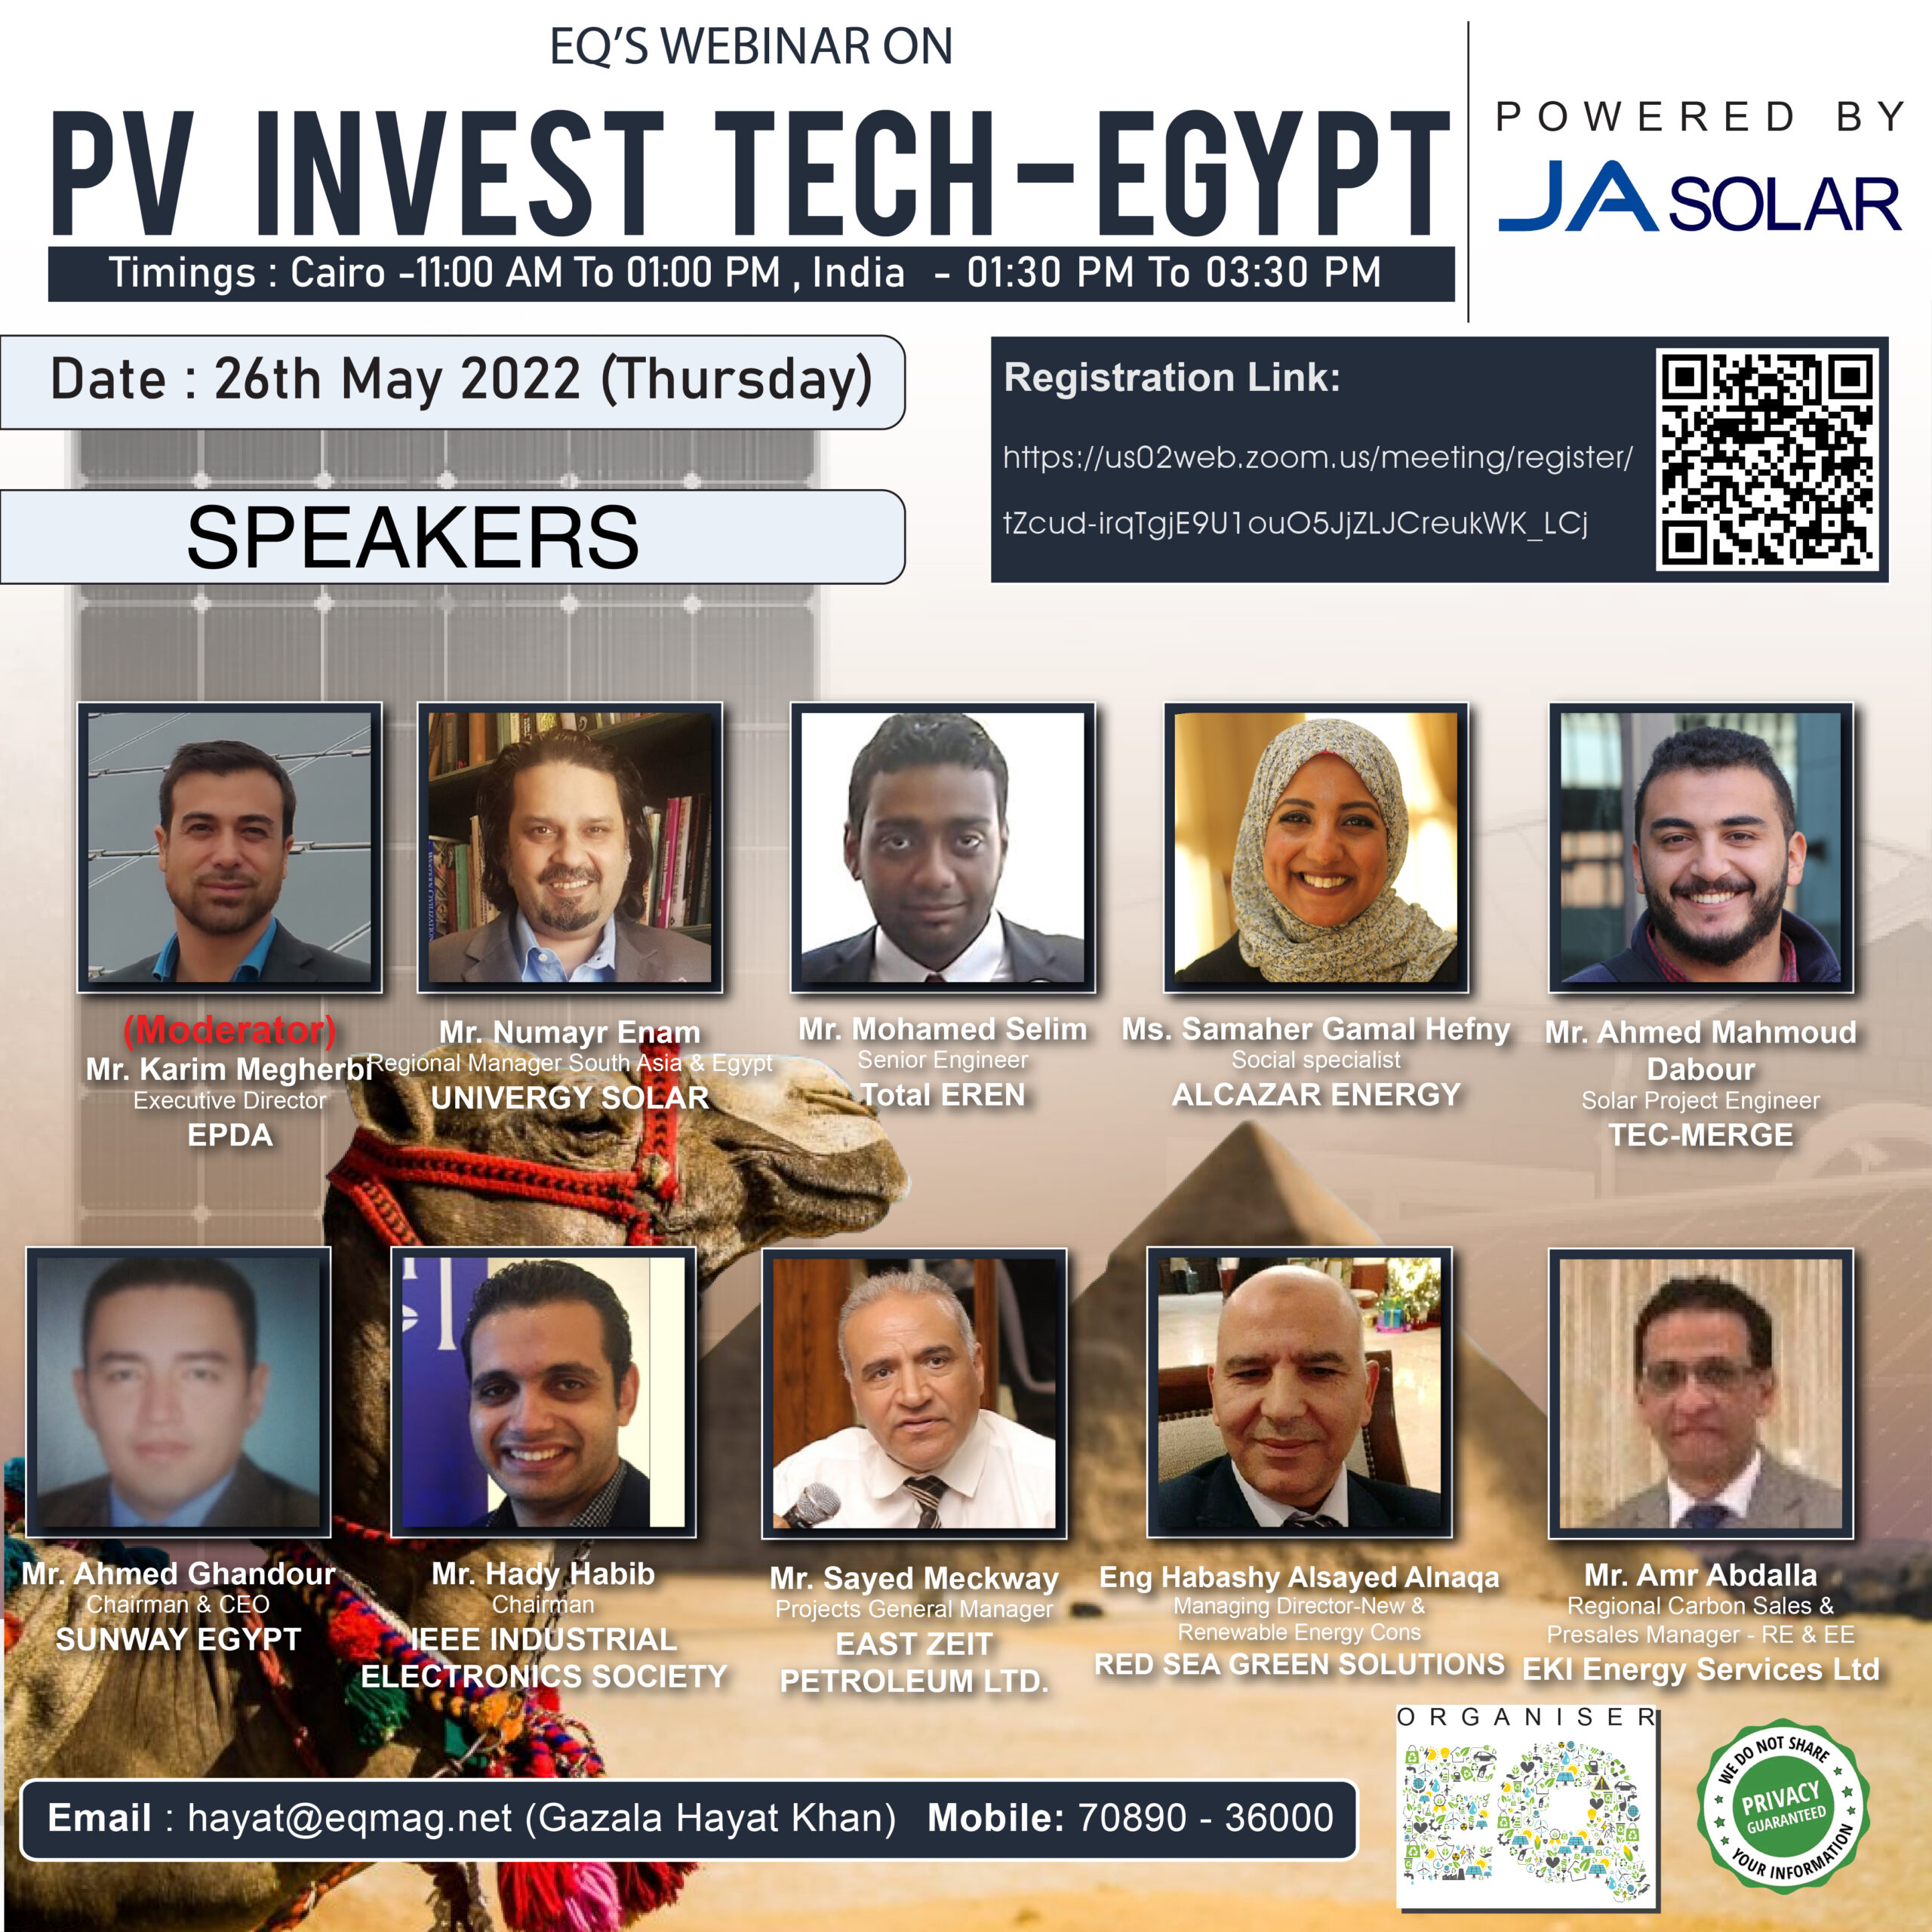 EQ Webinar on Egypt PV InvesTech Powered by JA SOLAR 26th May 2022 (Thursday) 2:30 PM Onwards….Register Now!